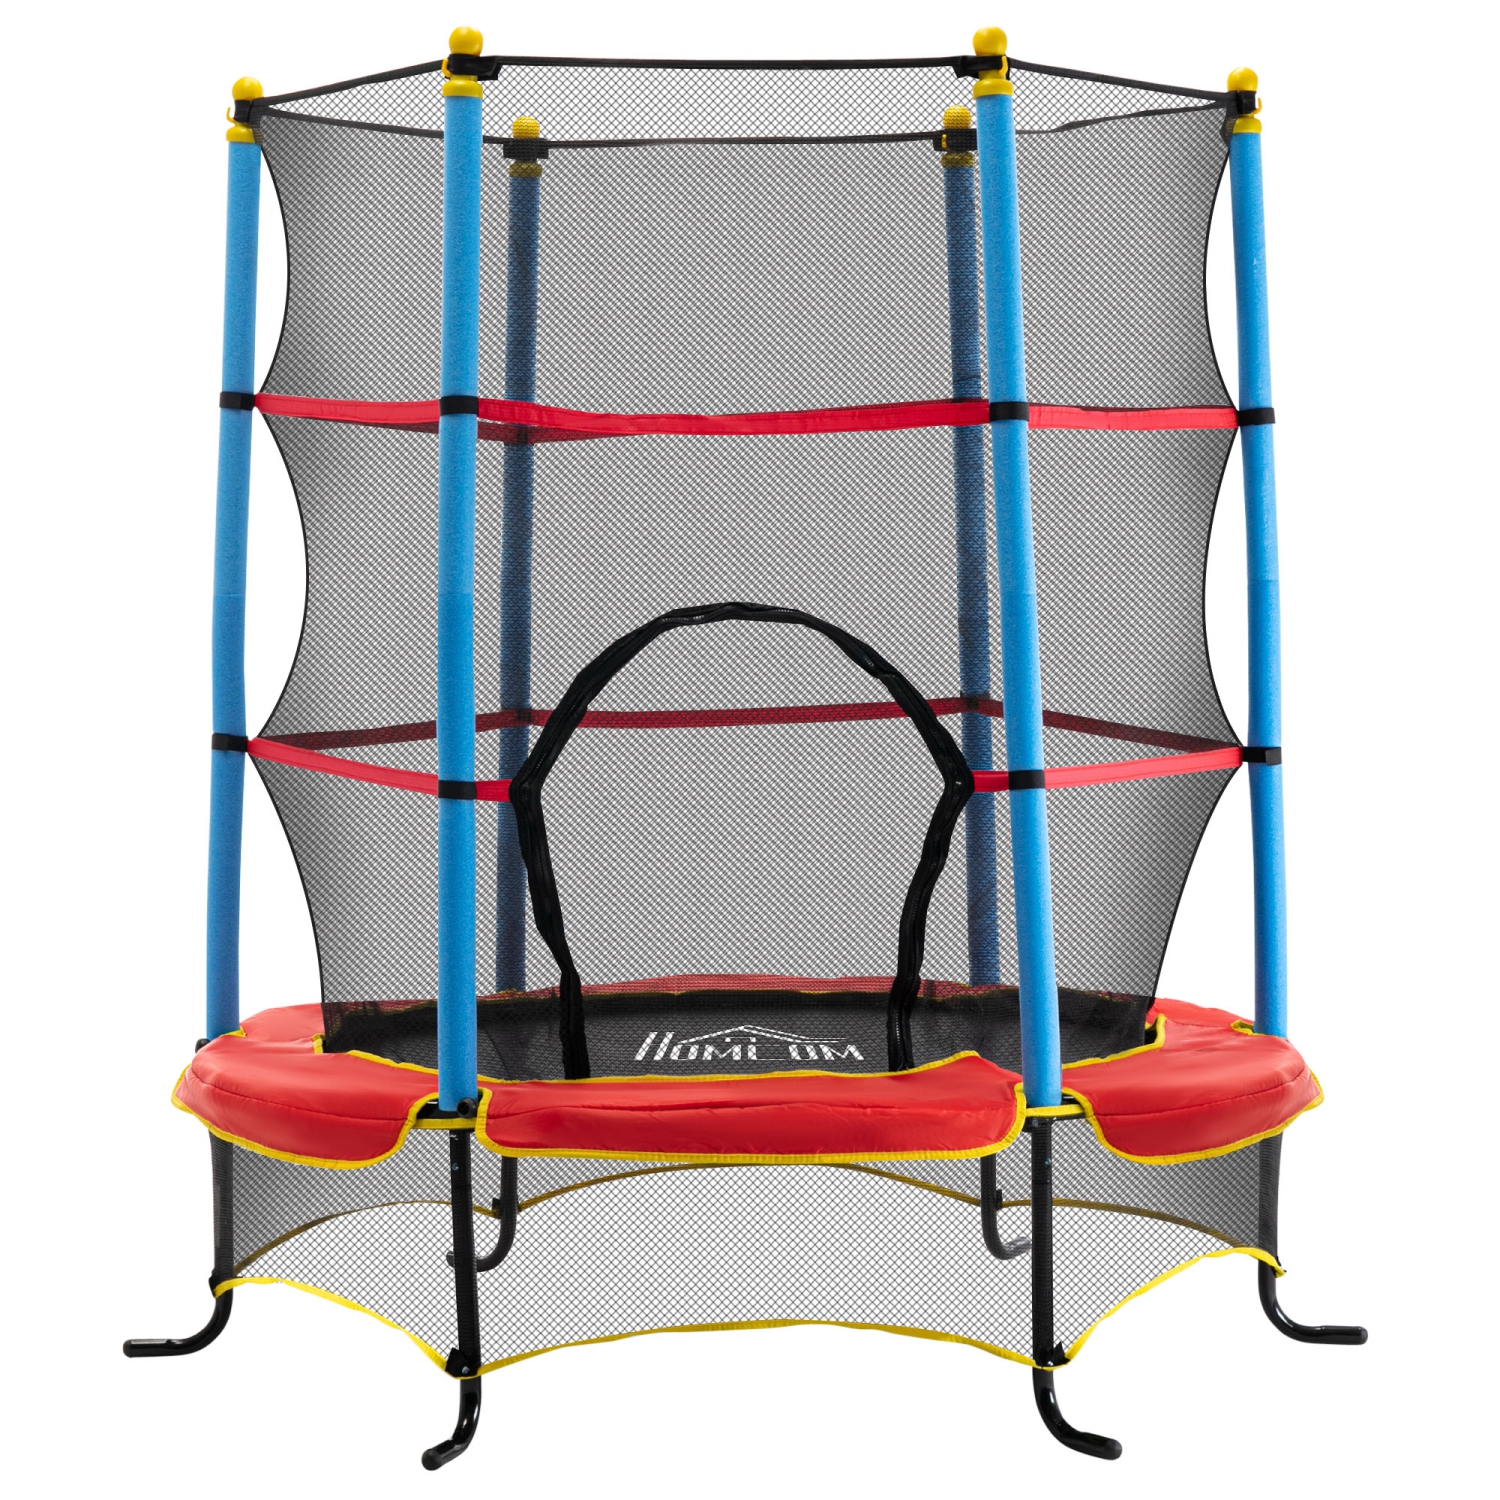 Qaba Kids Trampoline with Safety Enclosure Net and Built-in Zipper Safety Pad, Indoor Outdoor Exercise Fitness Equipment for Children Toddler Age 3-6 Years Old